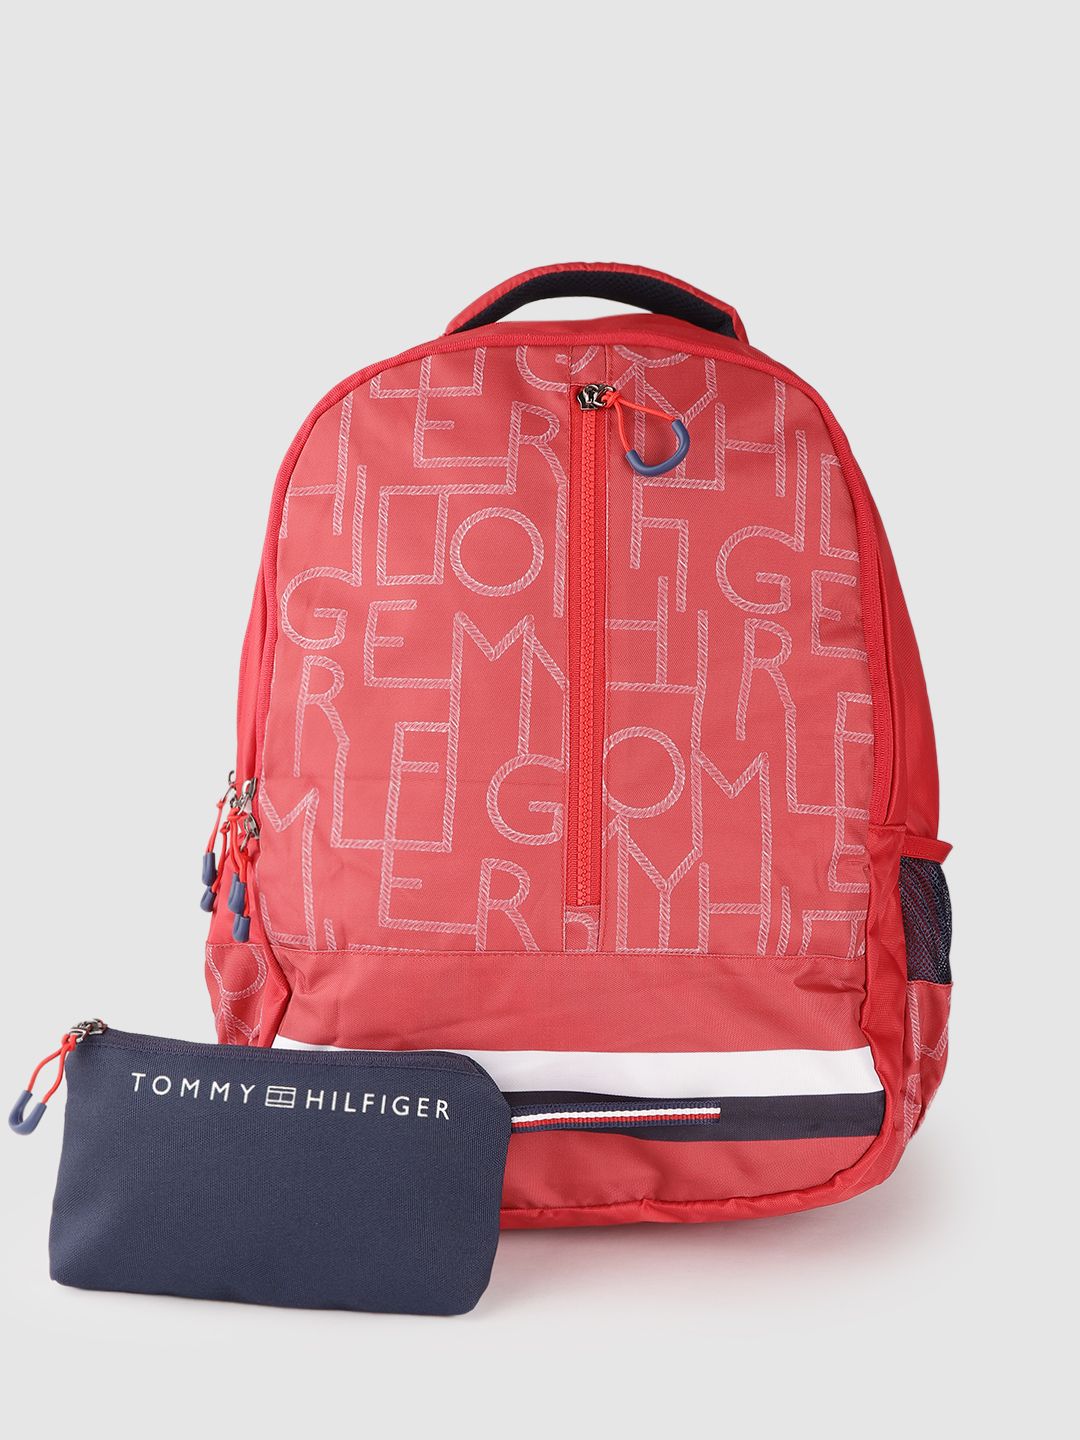 Tommy Hilfiger Unisex Red & White Typography Backpack 42.4 L with Pouch Price in India